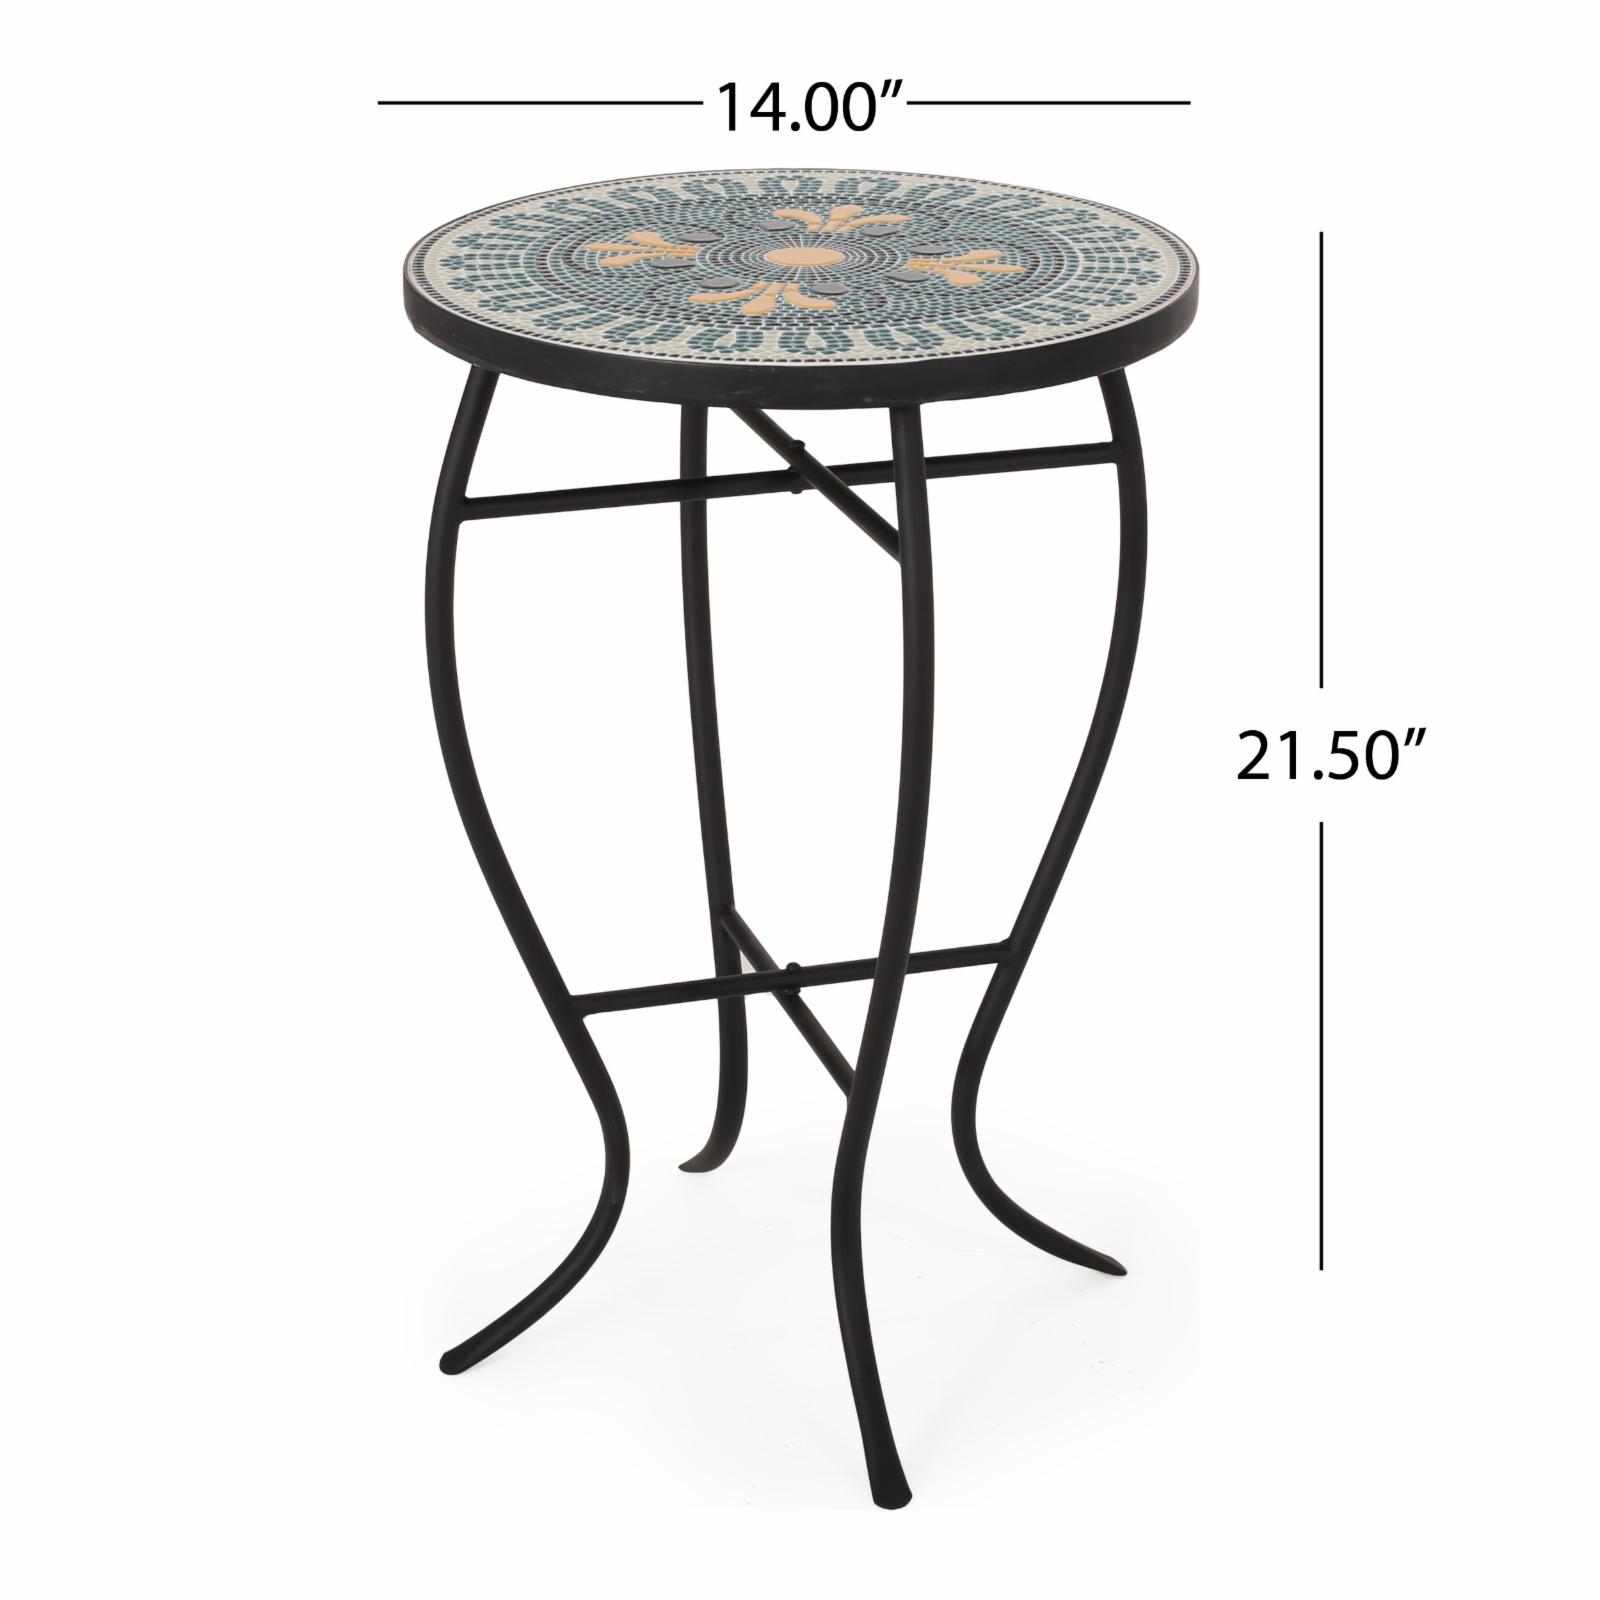 Bloomfield Outdoor Side Table - image 4 of 6